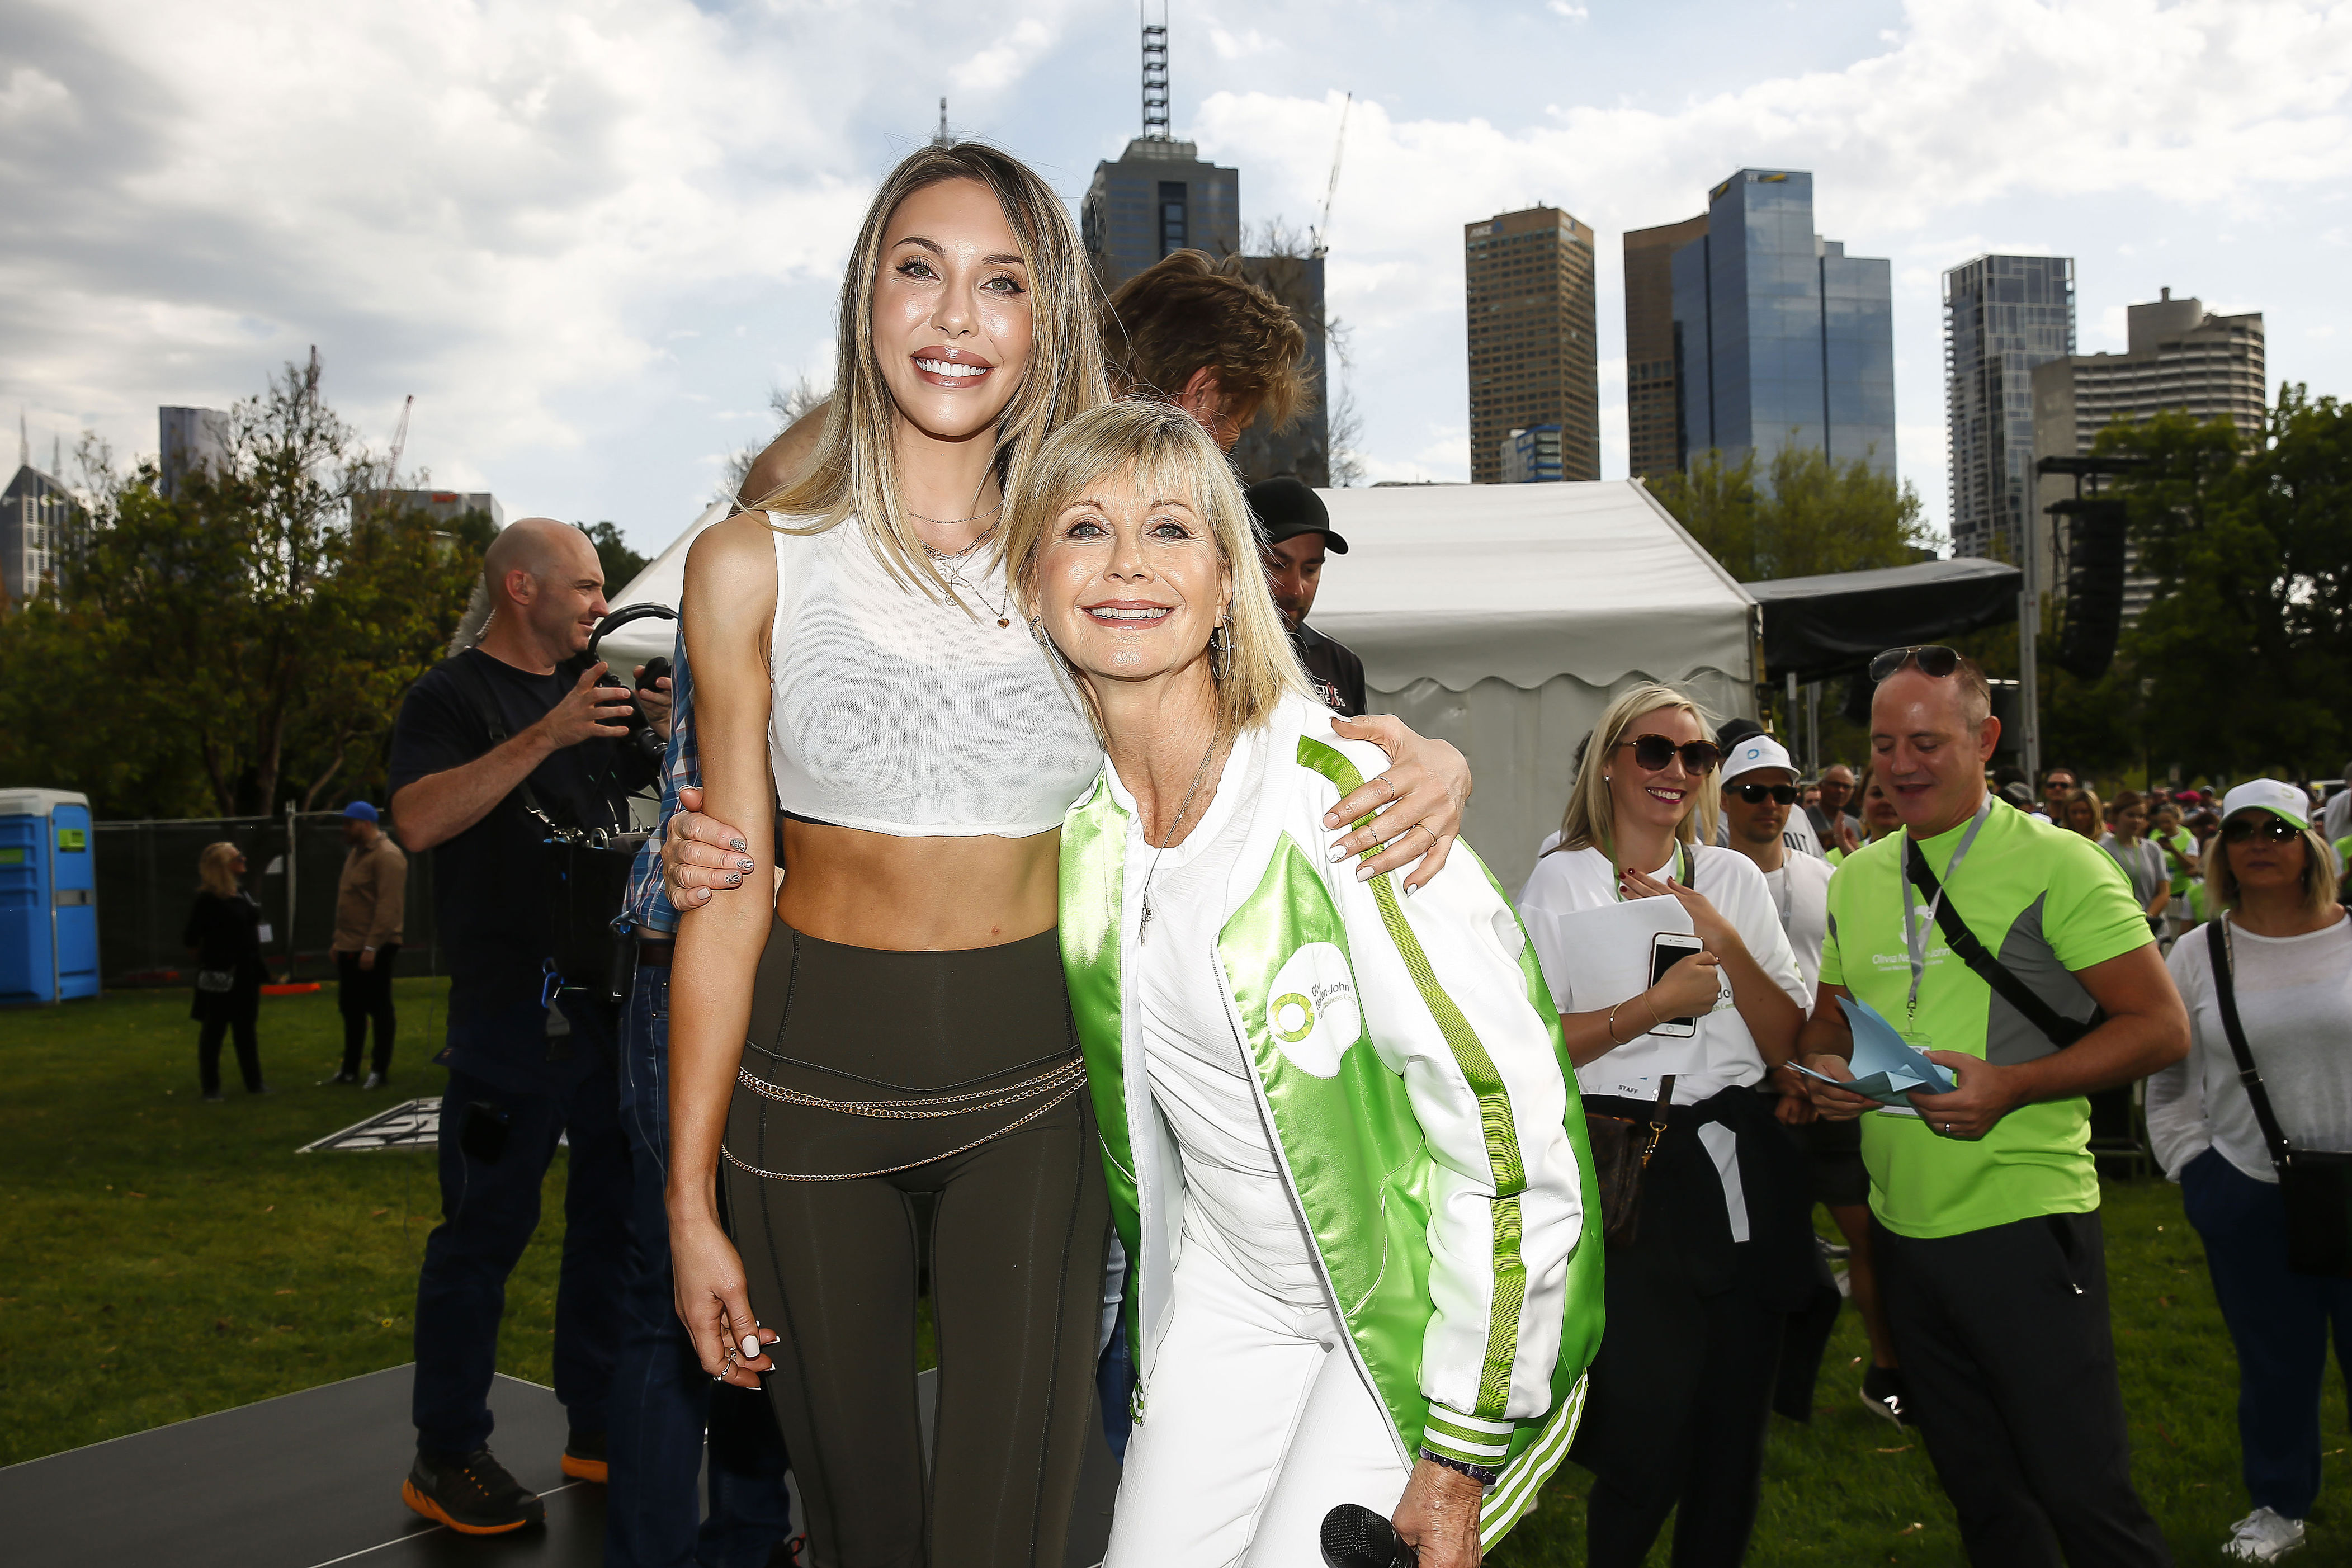 <p>Singer and cannabis farmer Chloe Lattanzi, who was born in 1986, joined mom Olivia Newton-John at the "Grease" singer-actress's Wellness Walk and Research Run in Melbourne, Australia, on Oct. 6, 2019, where they helped raise money for programs within the cancer fighter's ONJ Centre. They've worked together on music too: In 2015, they became the first mother-daughter duo to top the Billboard Dance Club Songs chart when their song "You Have to Believe" hit No. 1. In 2021, they teamed up again on the ballad "Window in the Wall." </p>